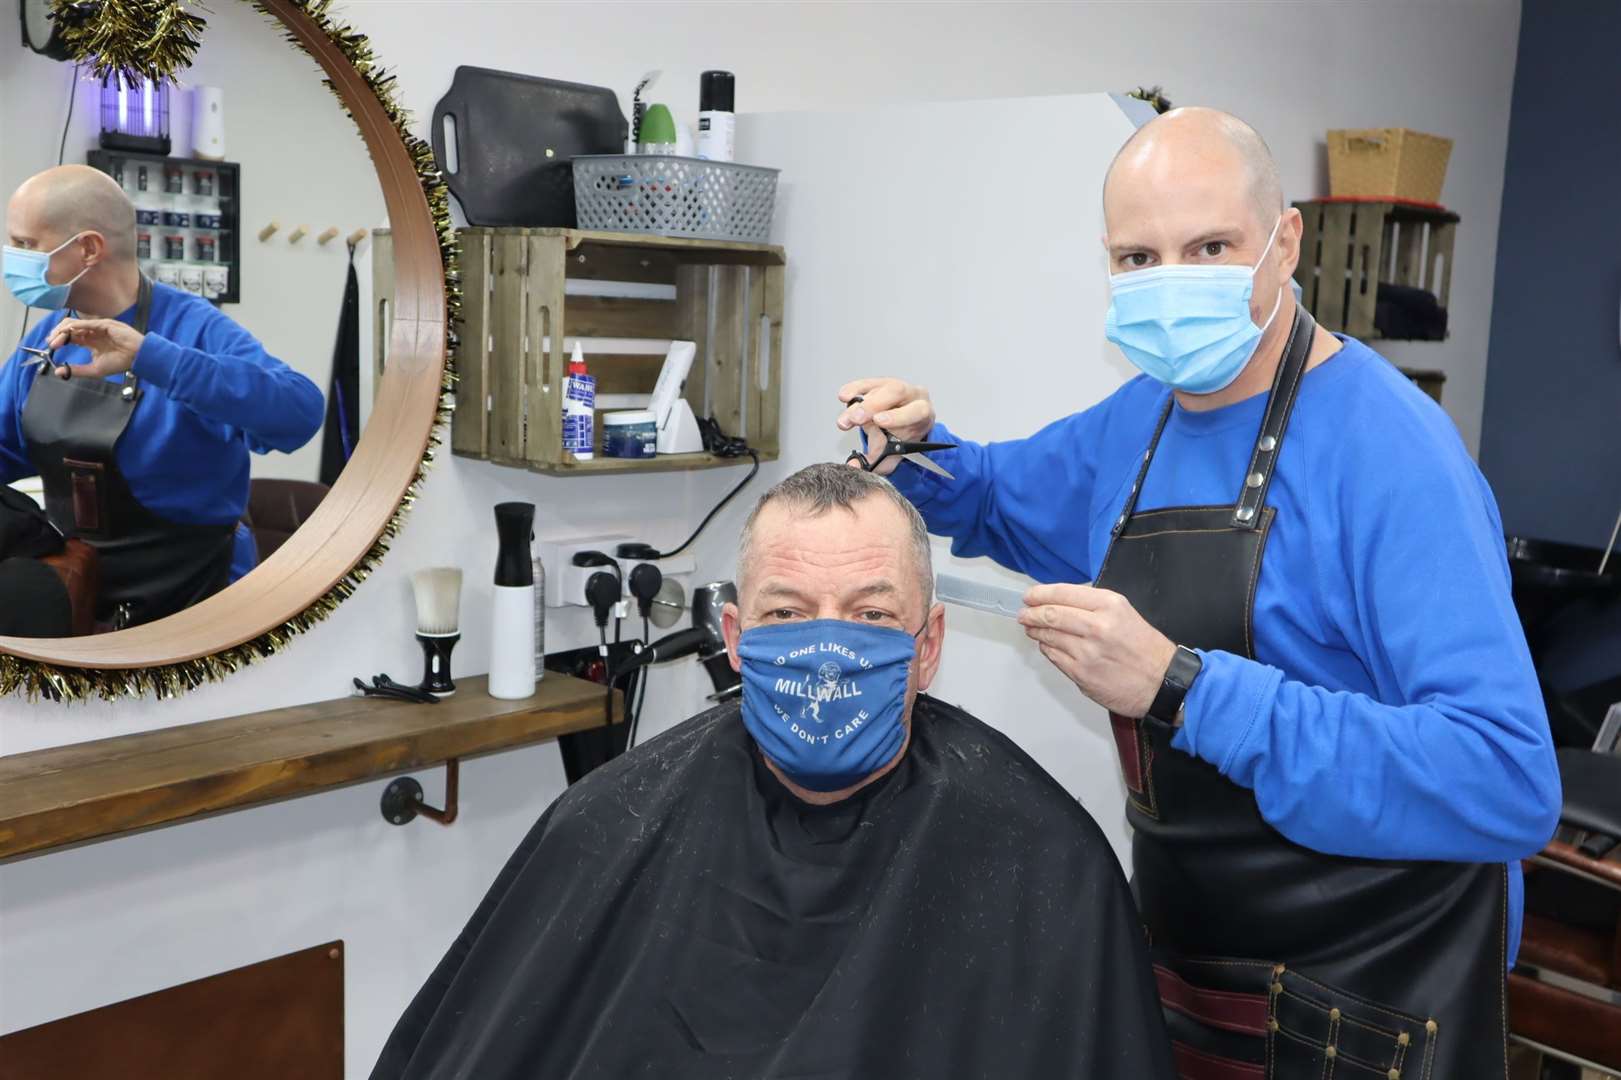 Colin Bastable of Capelli Salon in Sheerness High Street gives customer Ian Hardley a haircut after the second coronavirus lockdown